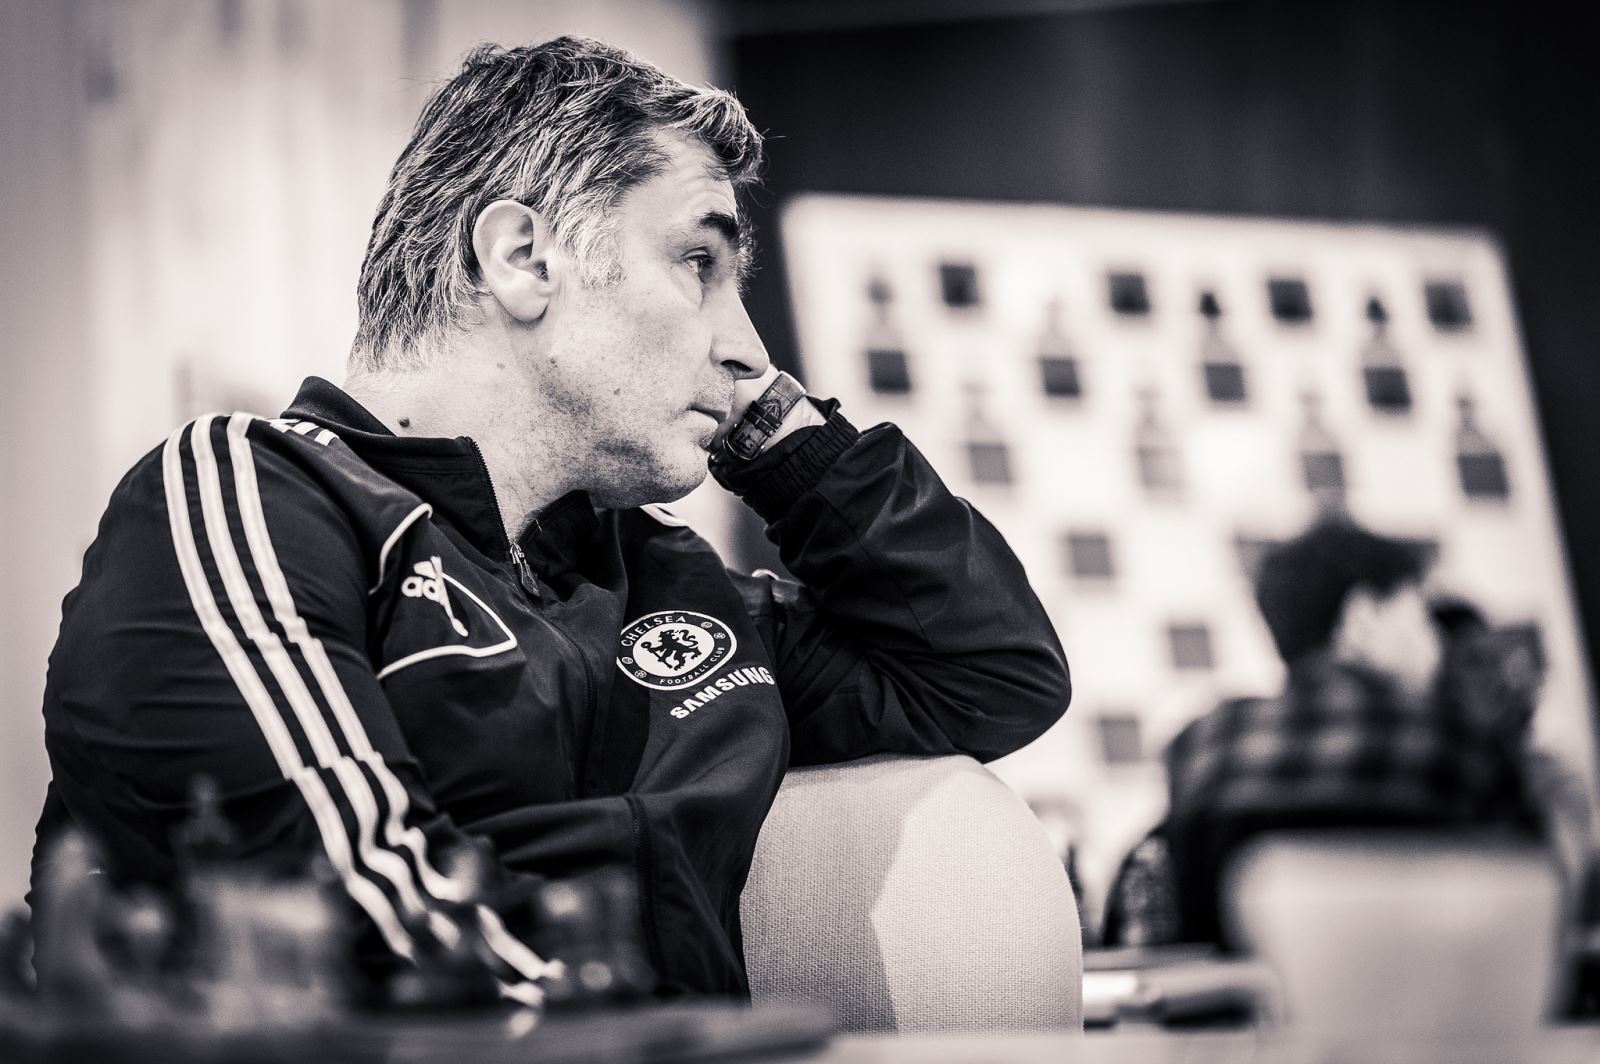 Vassiy Ivanchuk during his fourth round game against Wei Yi